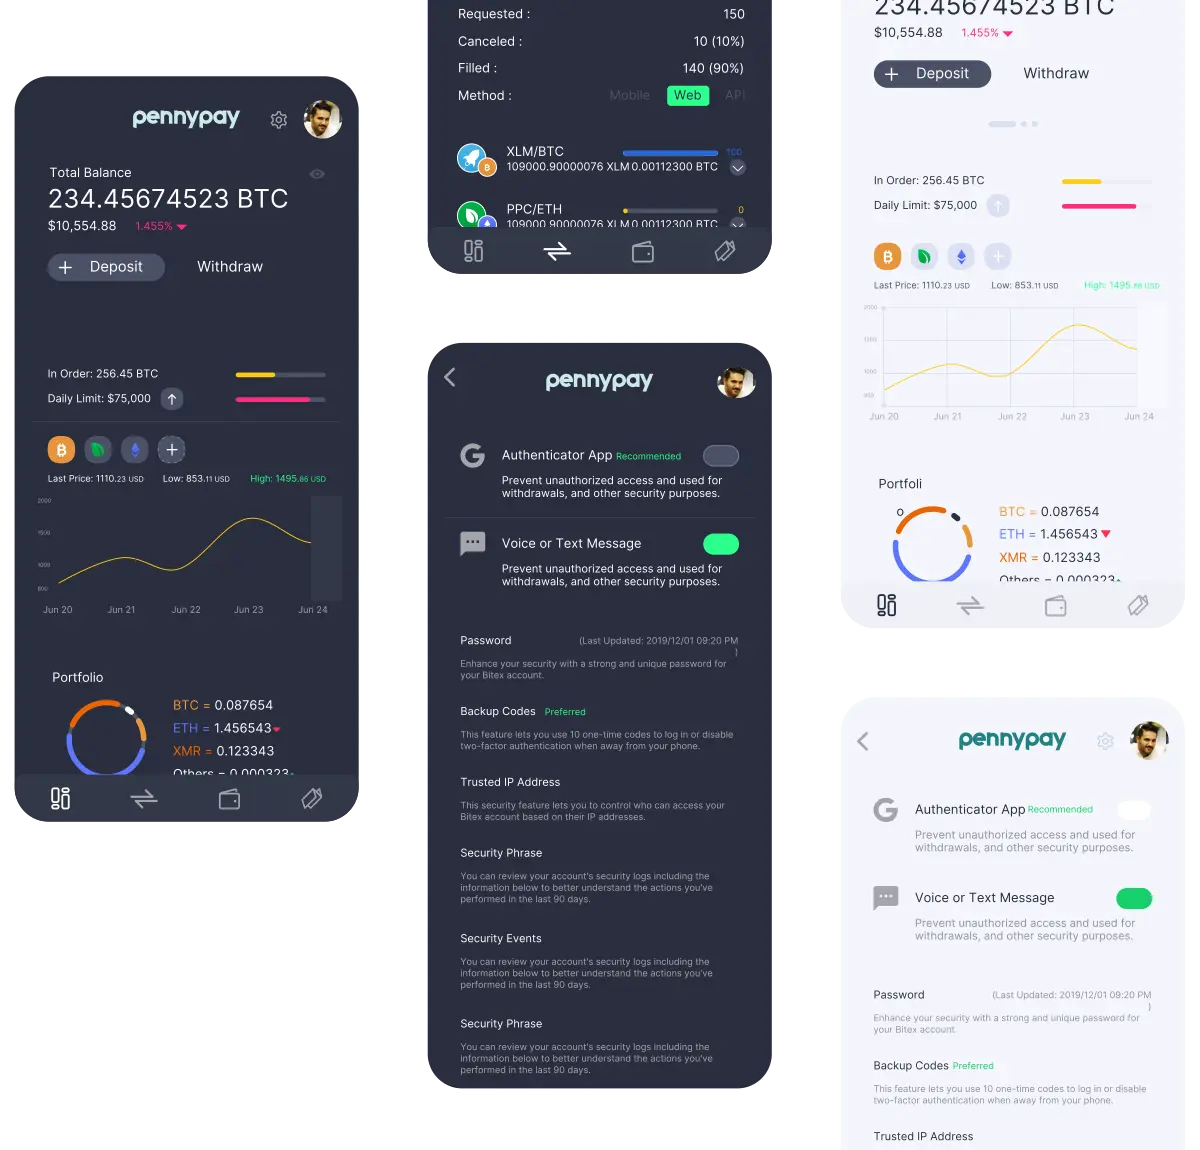 Screenshots of the PennyPay mobile app in light and dark modes